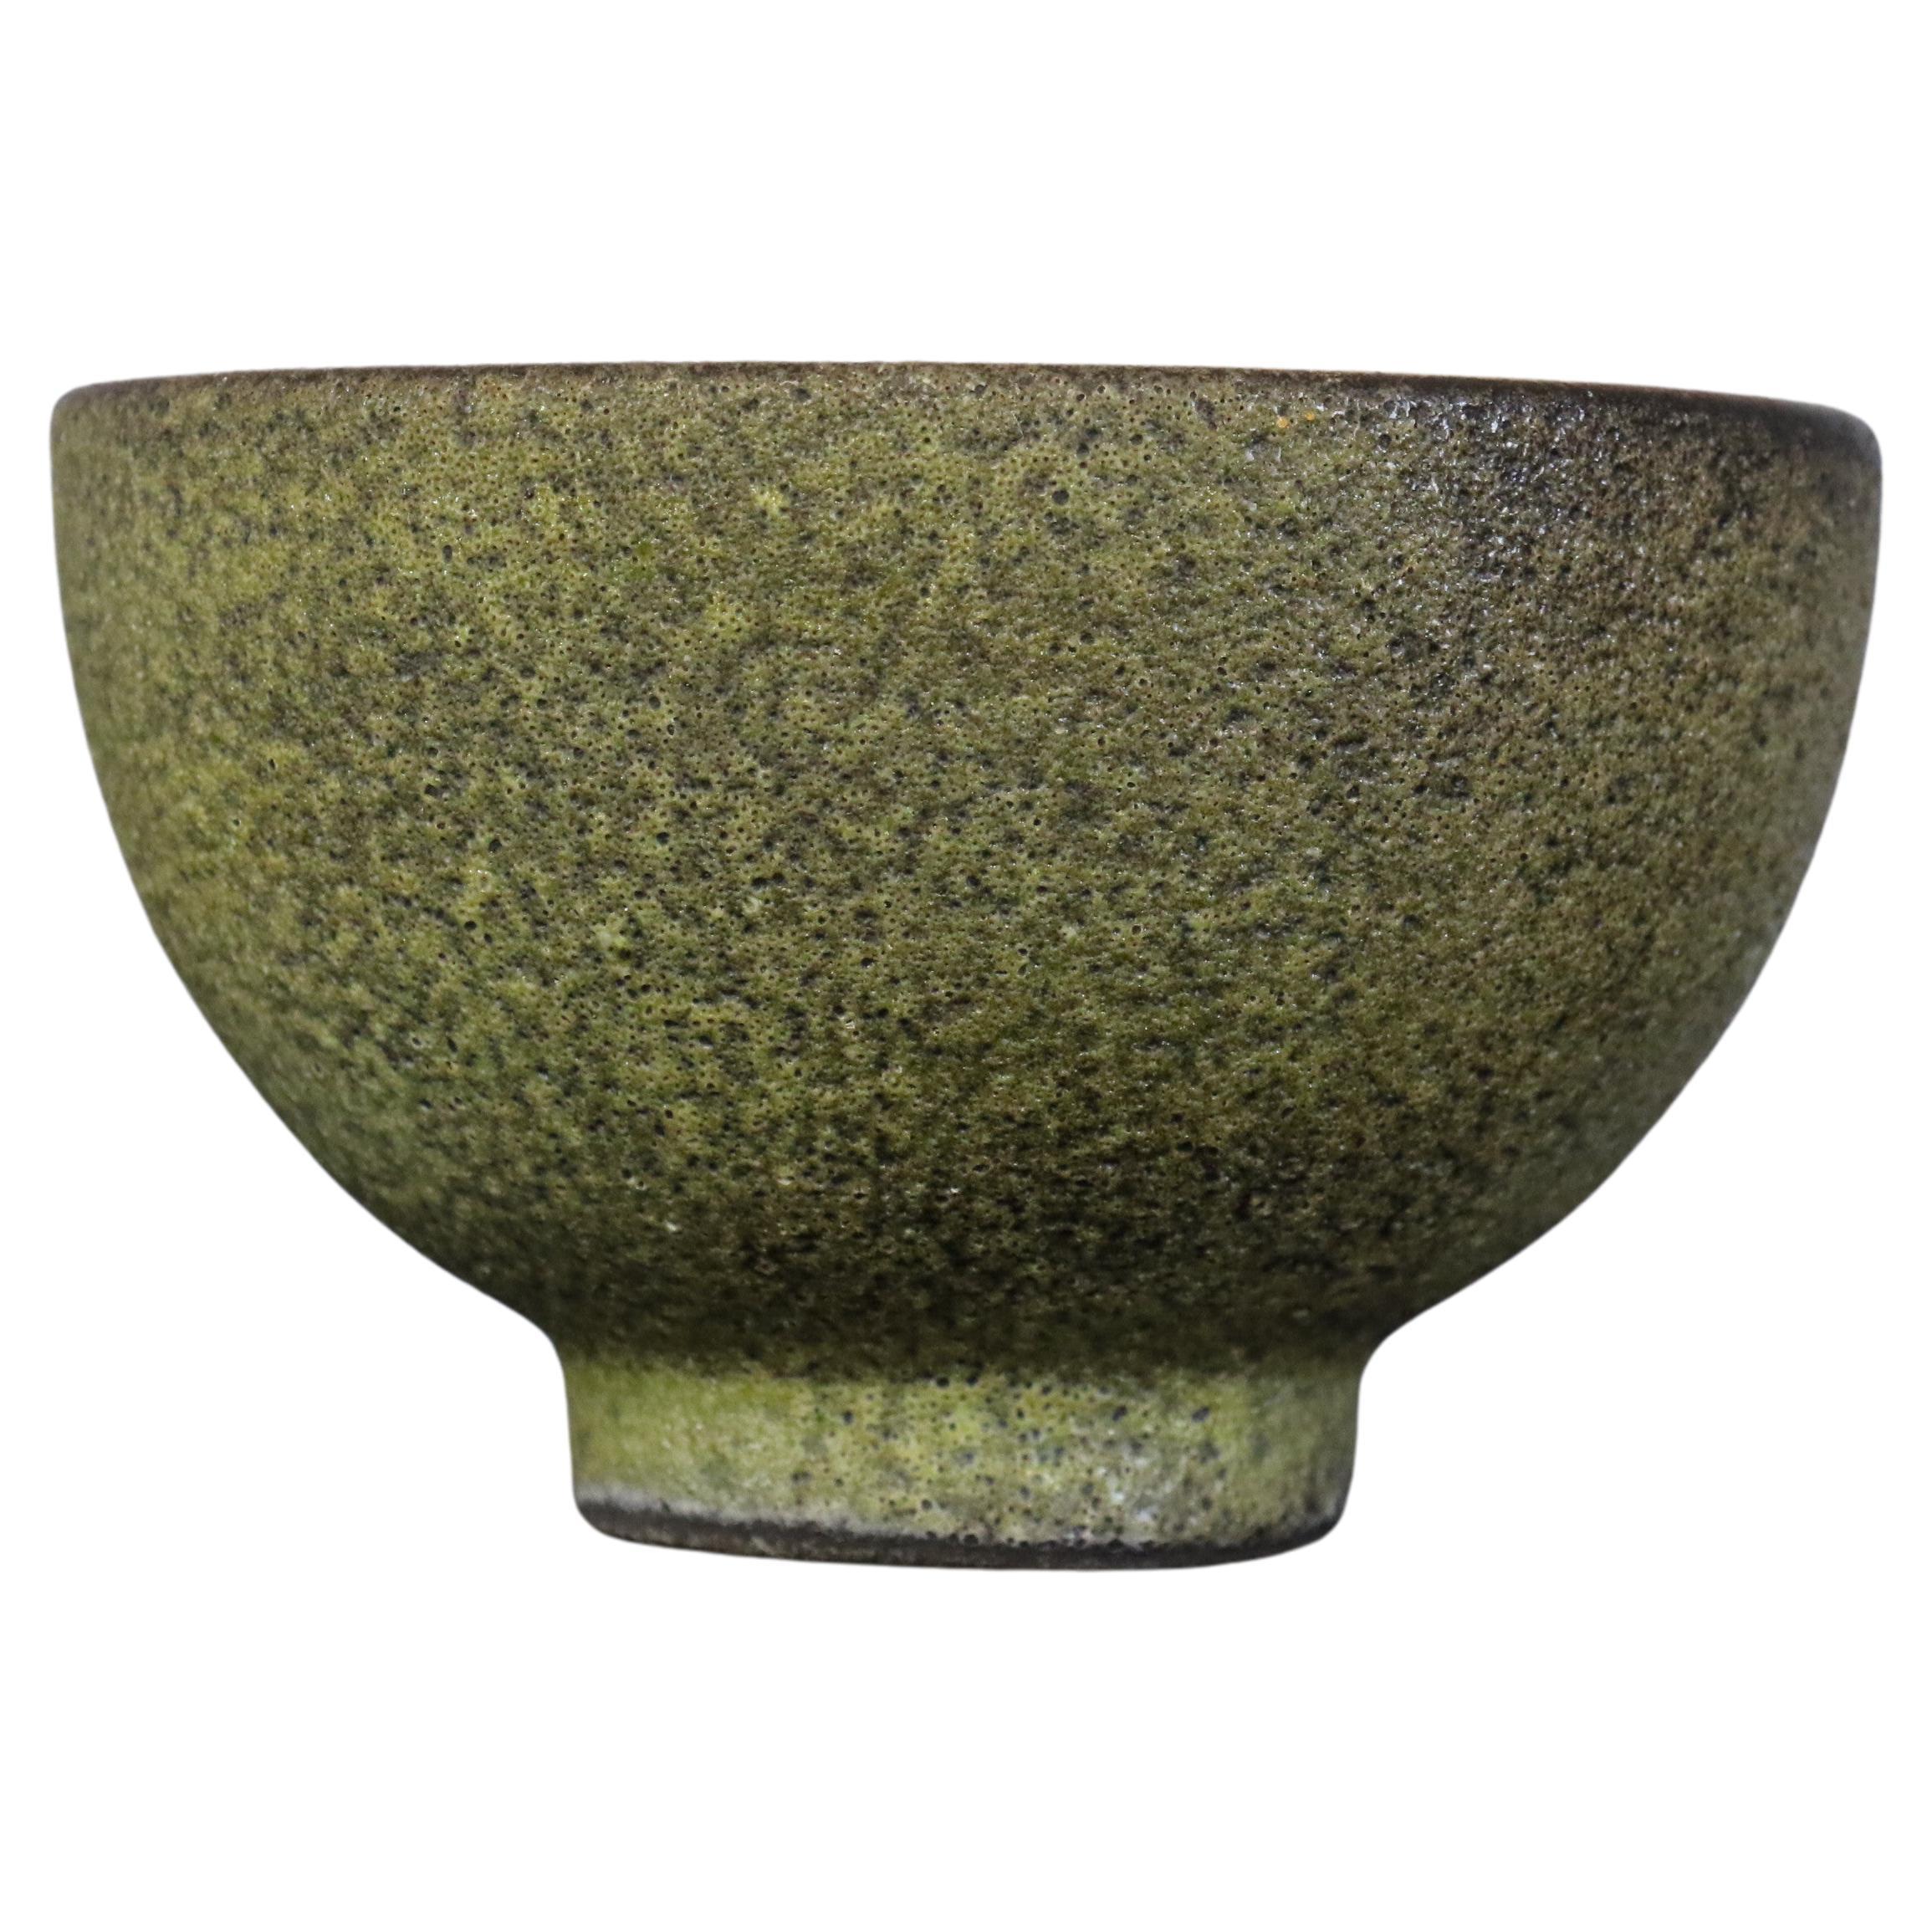 Bowl with lava glaze, attributed to James Lovera, 1970

Beautiful lava glazed bowl, characteristic of James Lovera's work. Green and brown in color, this work is particularly fine and delicate. 

It is in very good condition.